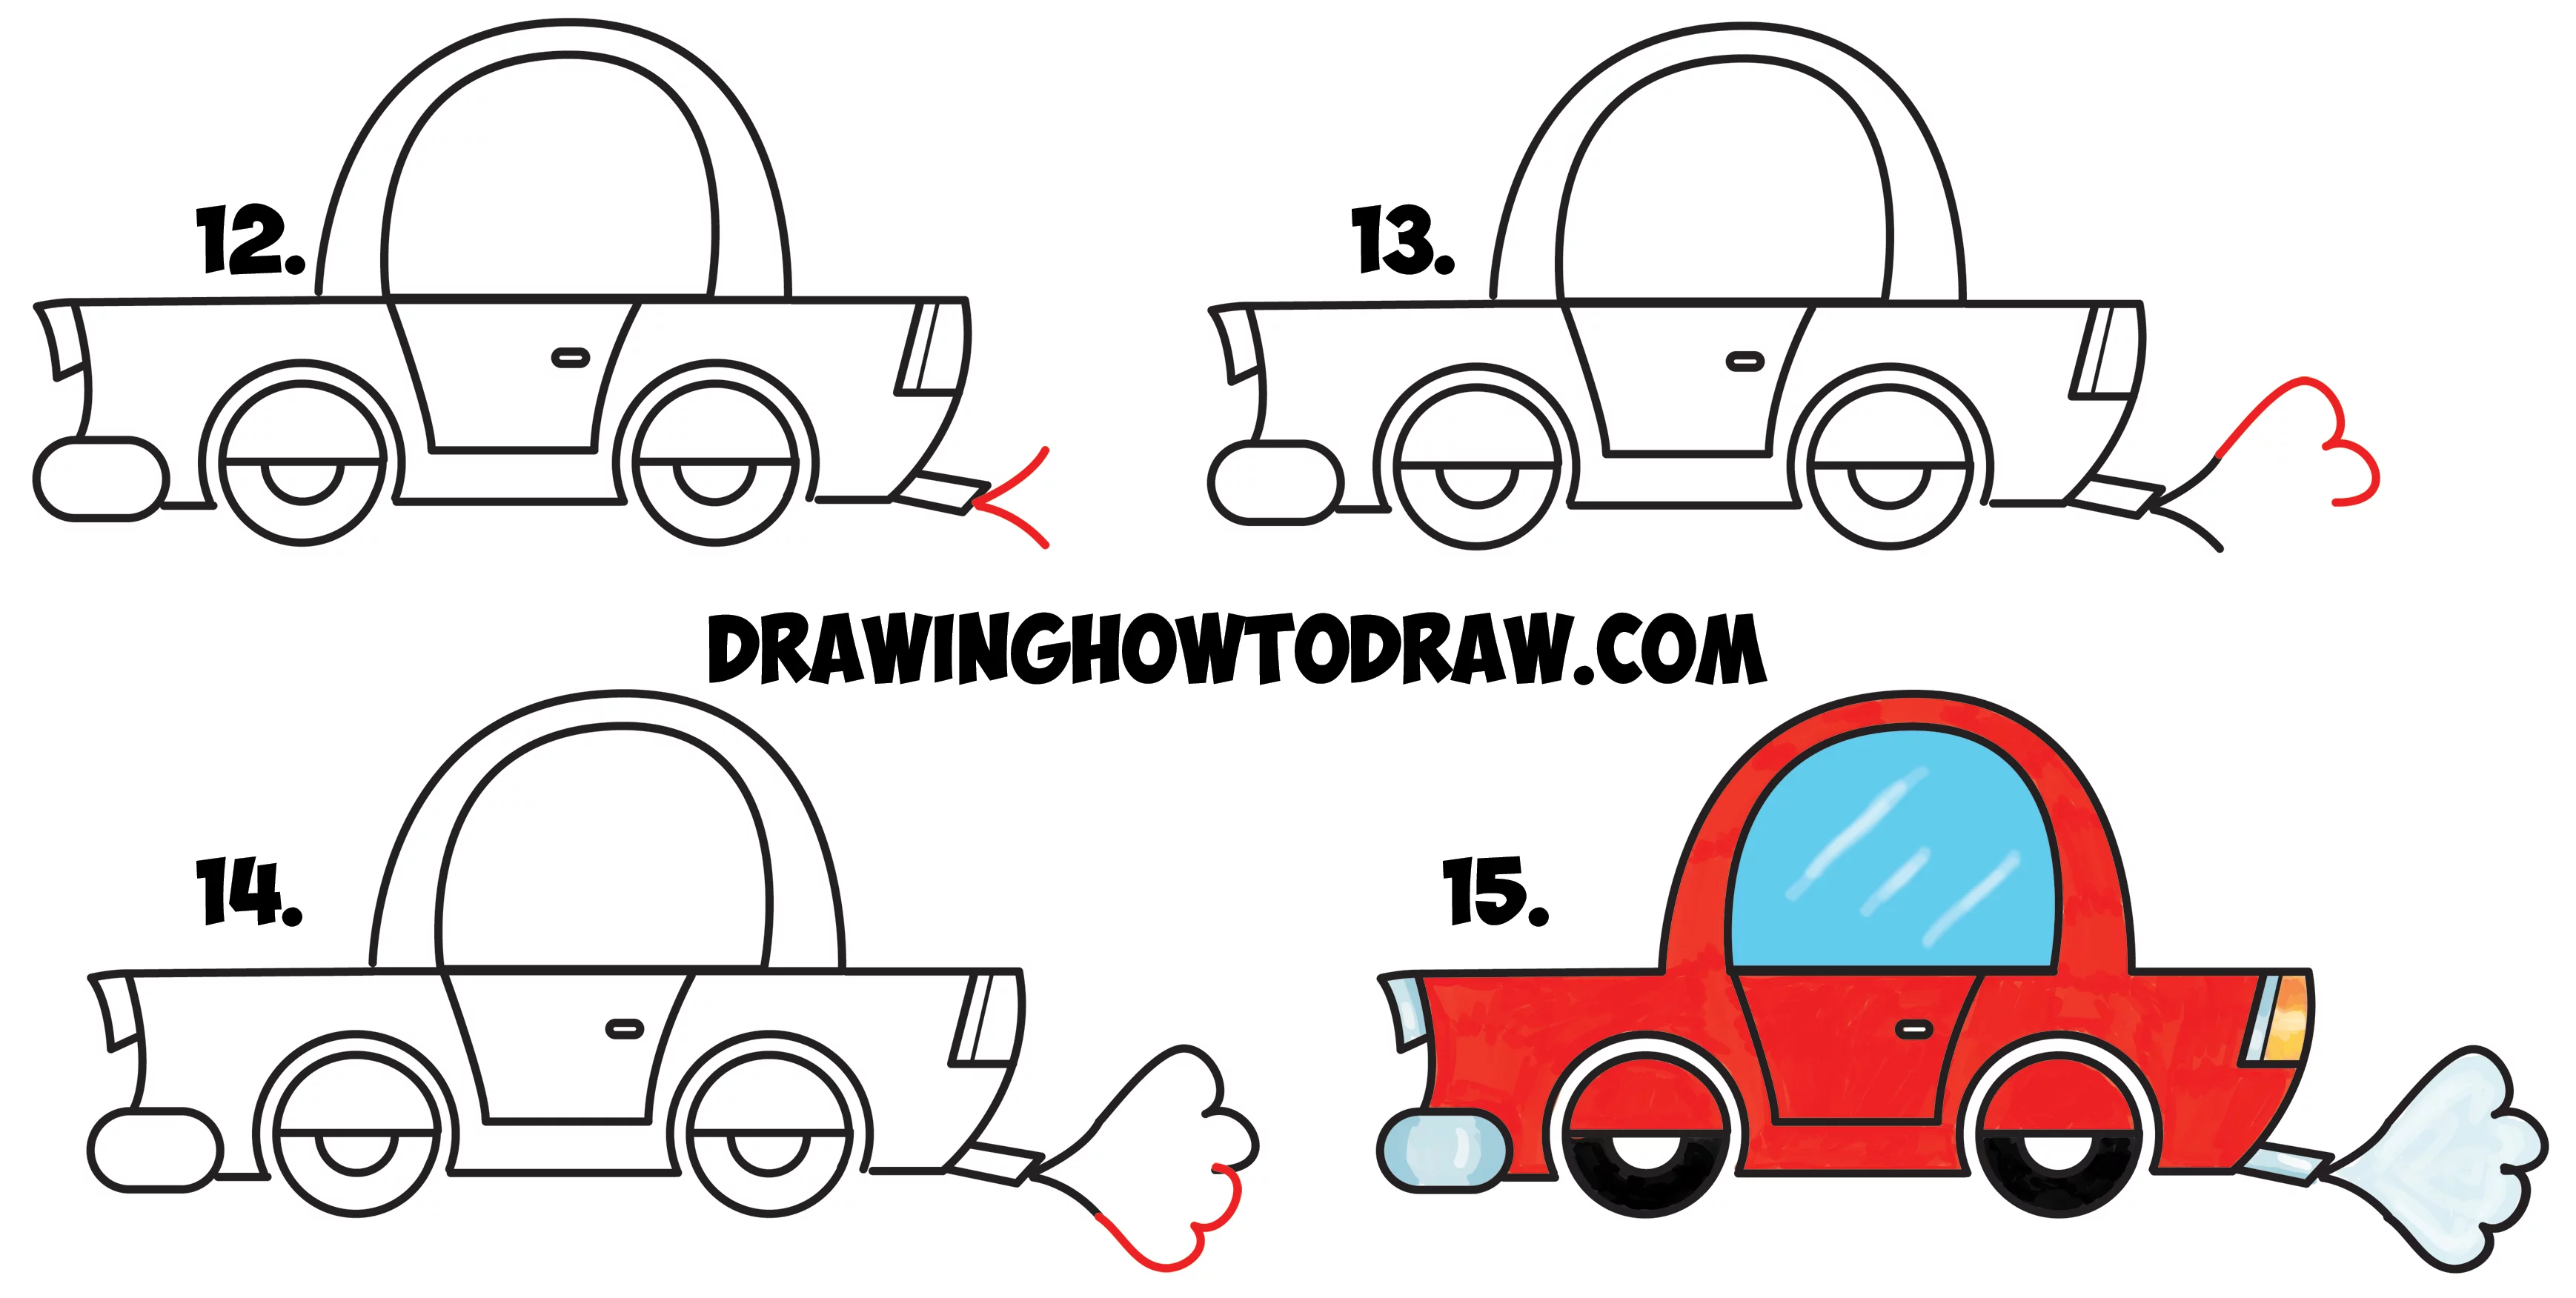 How to Draw a Cartoon Car from Lowercase Letter e Shapes - Easy Drawing  Tutorial for Kids - How to Draw Step by Step Drawing Tutorials